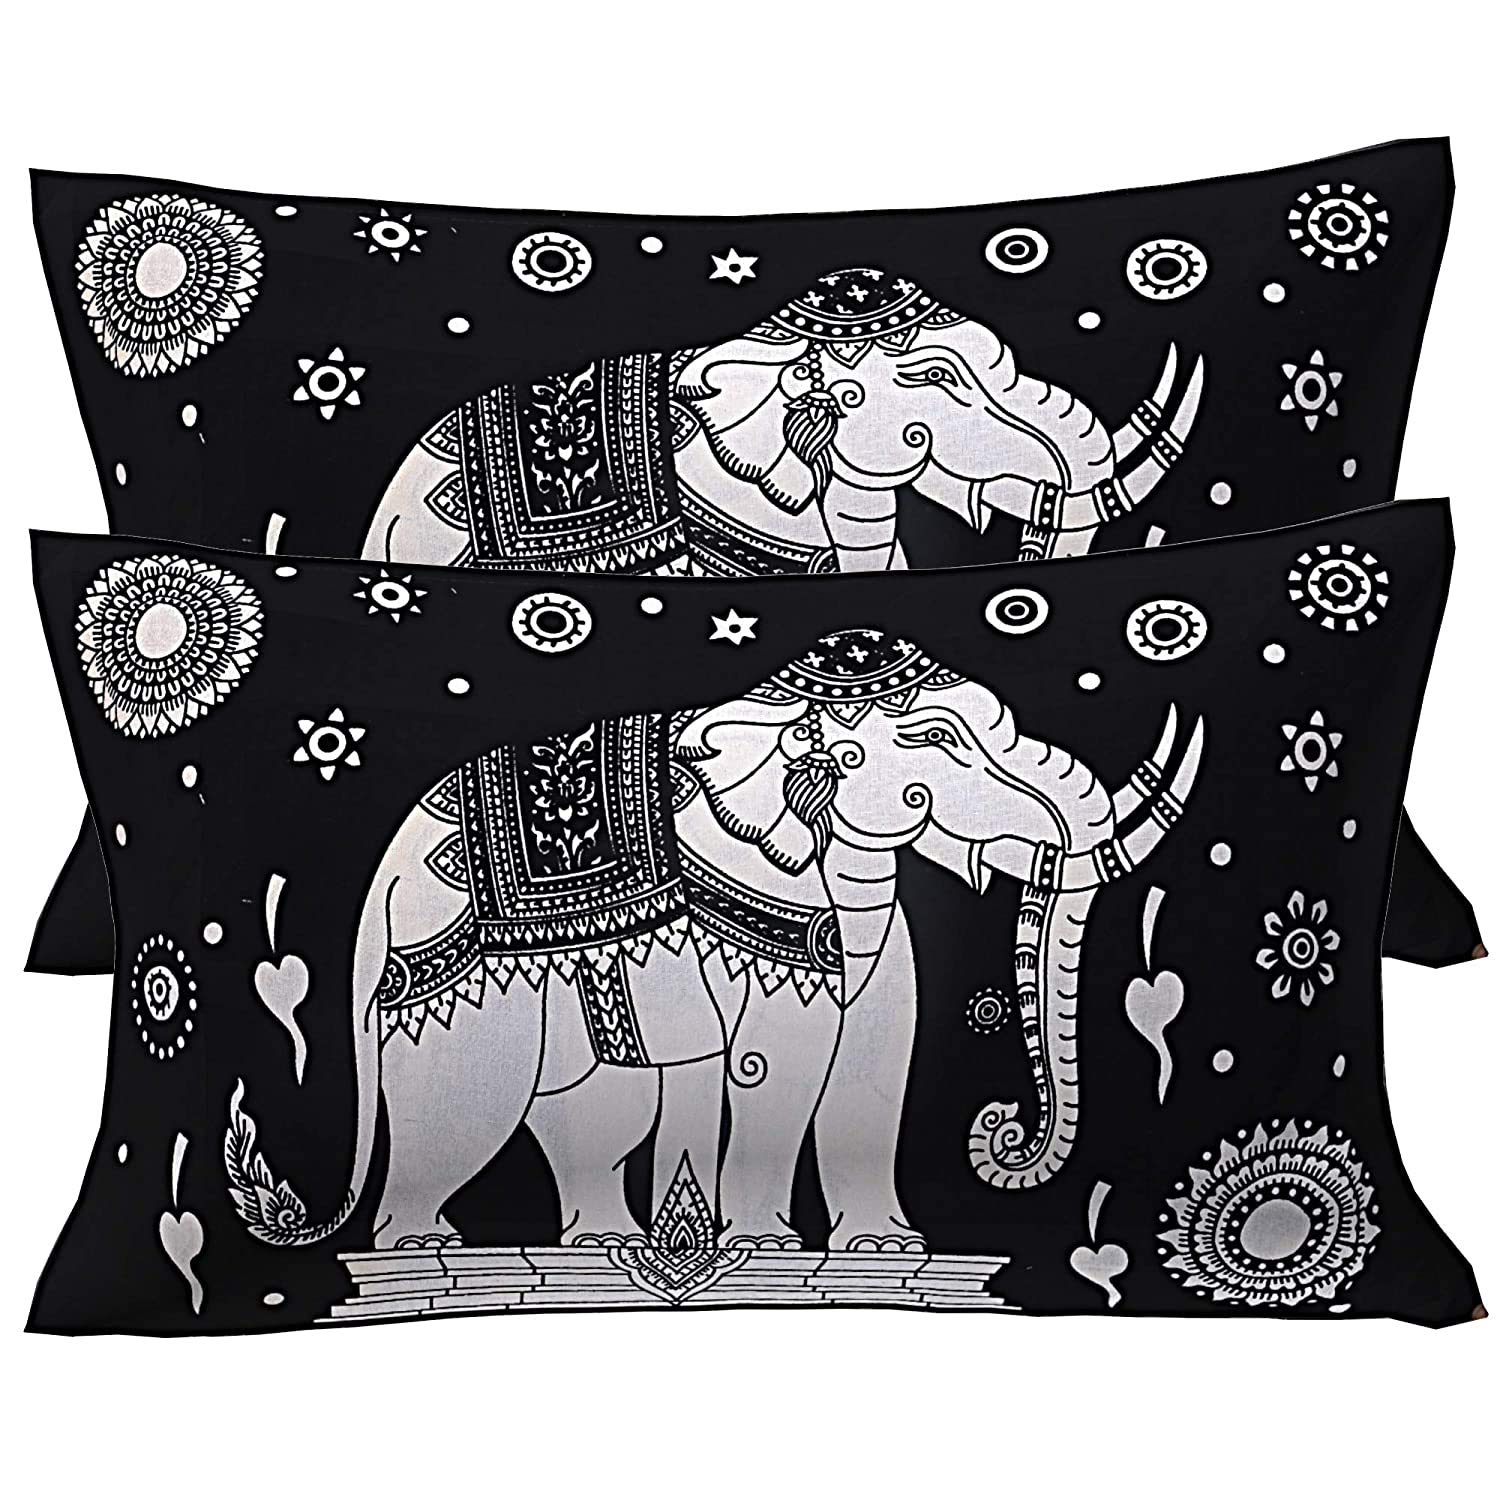 Double Bedsheet With Big Elephant And Tree Pattern Two Pillow